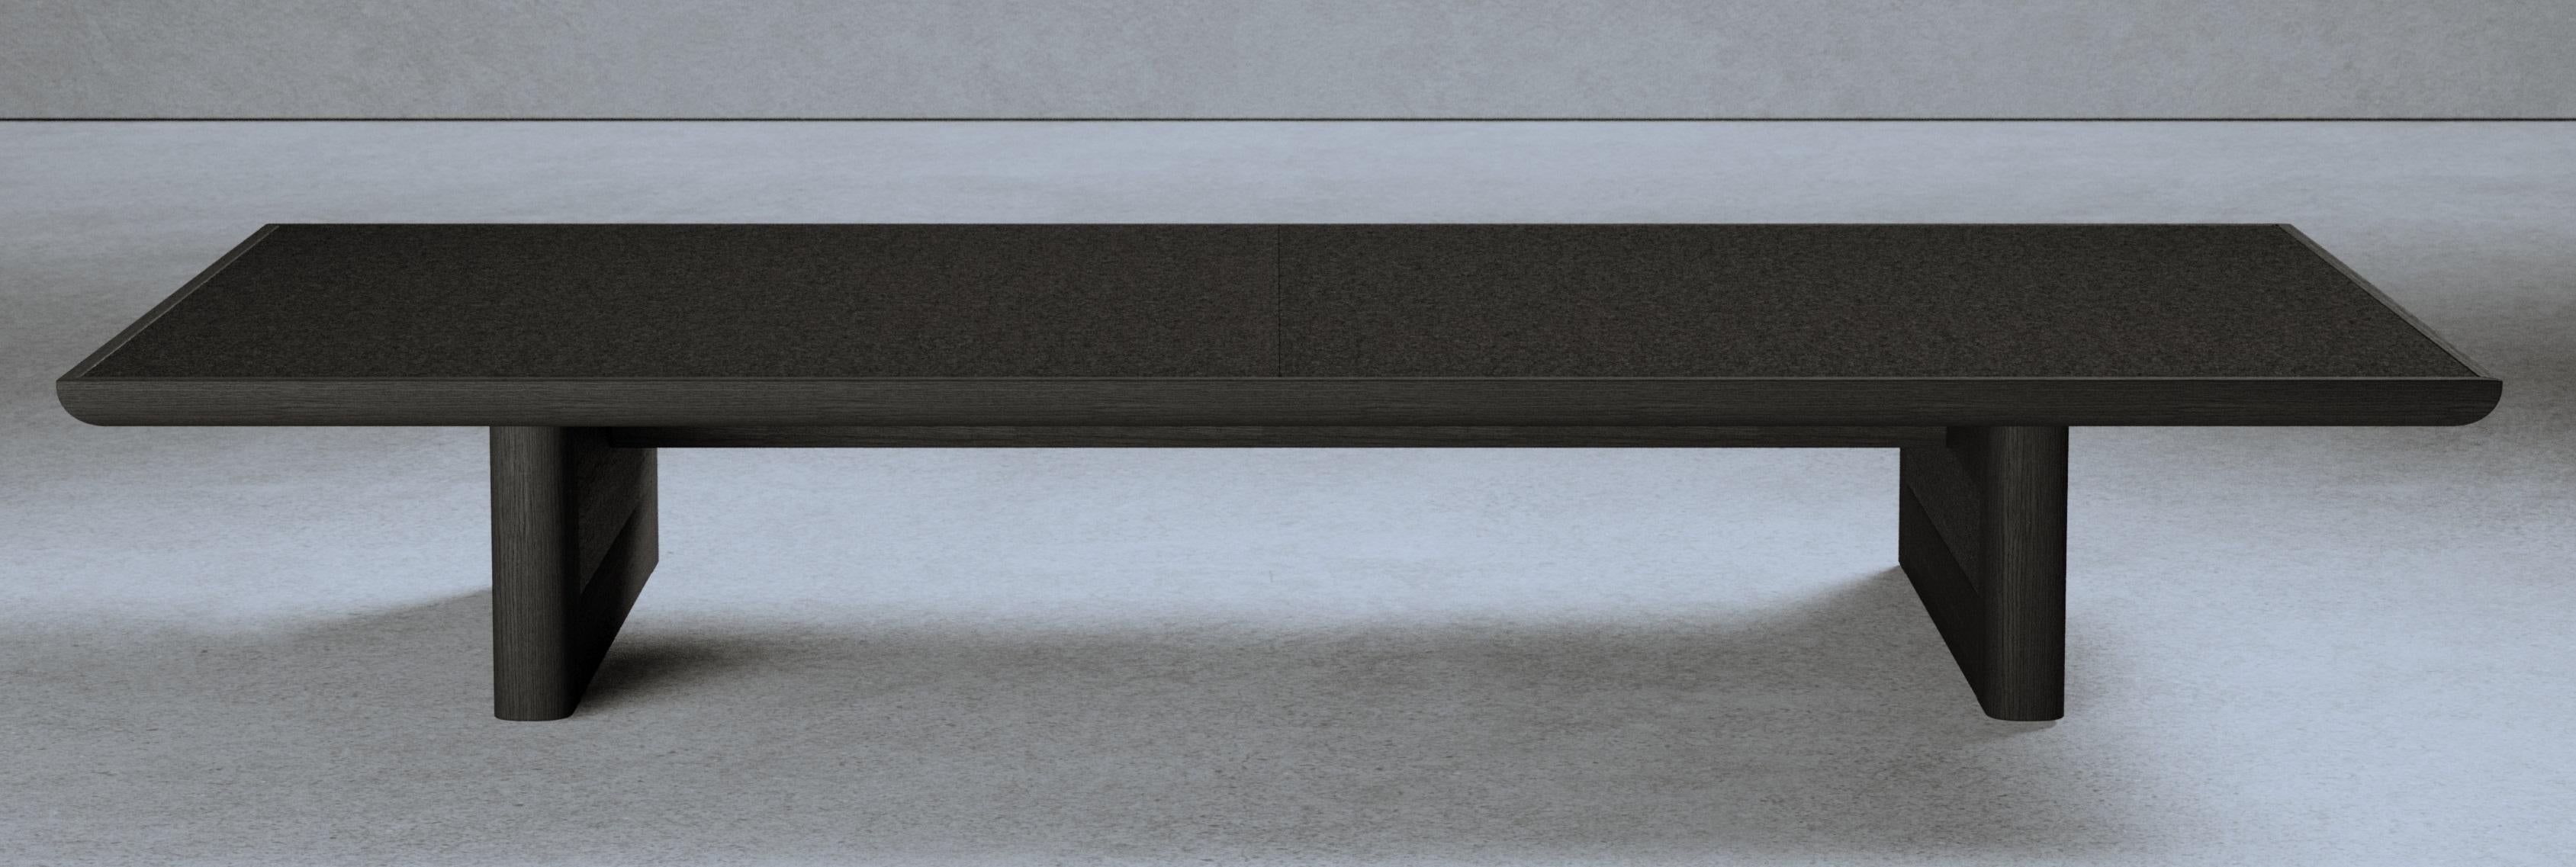 Vittorio 180 Coffee Table by Gio Pagani
Dimensions: D 90 x W 180 x H 28.5 cm.
Materials: Black ash wood and Loro Piana wool.

In a fluid society capable of mixing infinite social and cultural varieties, the nostalgic search for reworked aesthetics